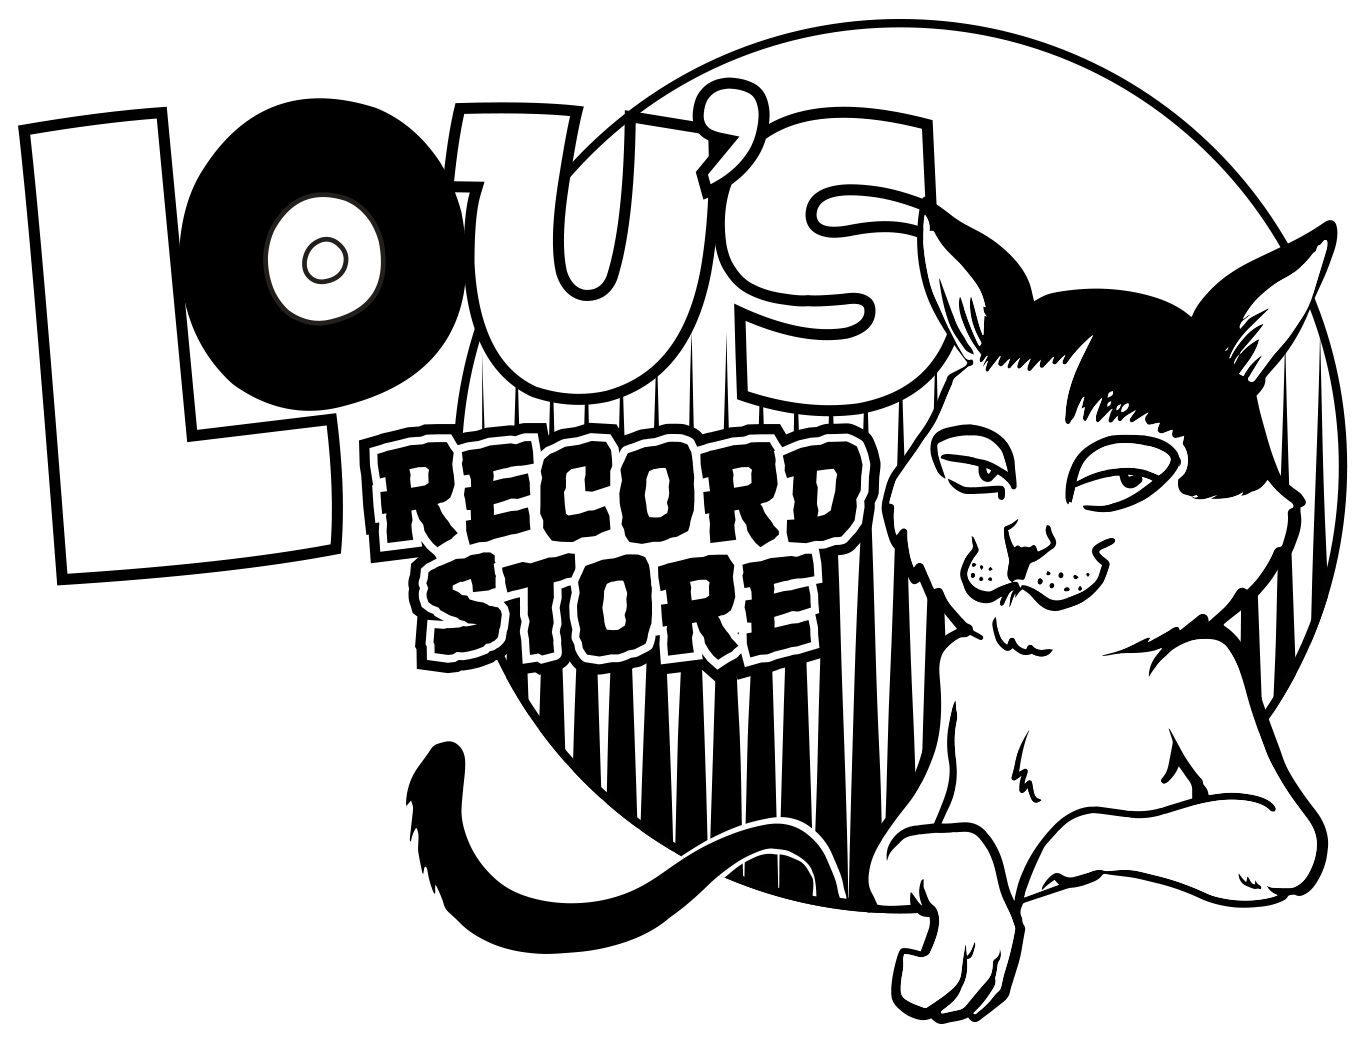 Lou’s Record Store - 1 of 1